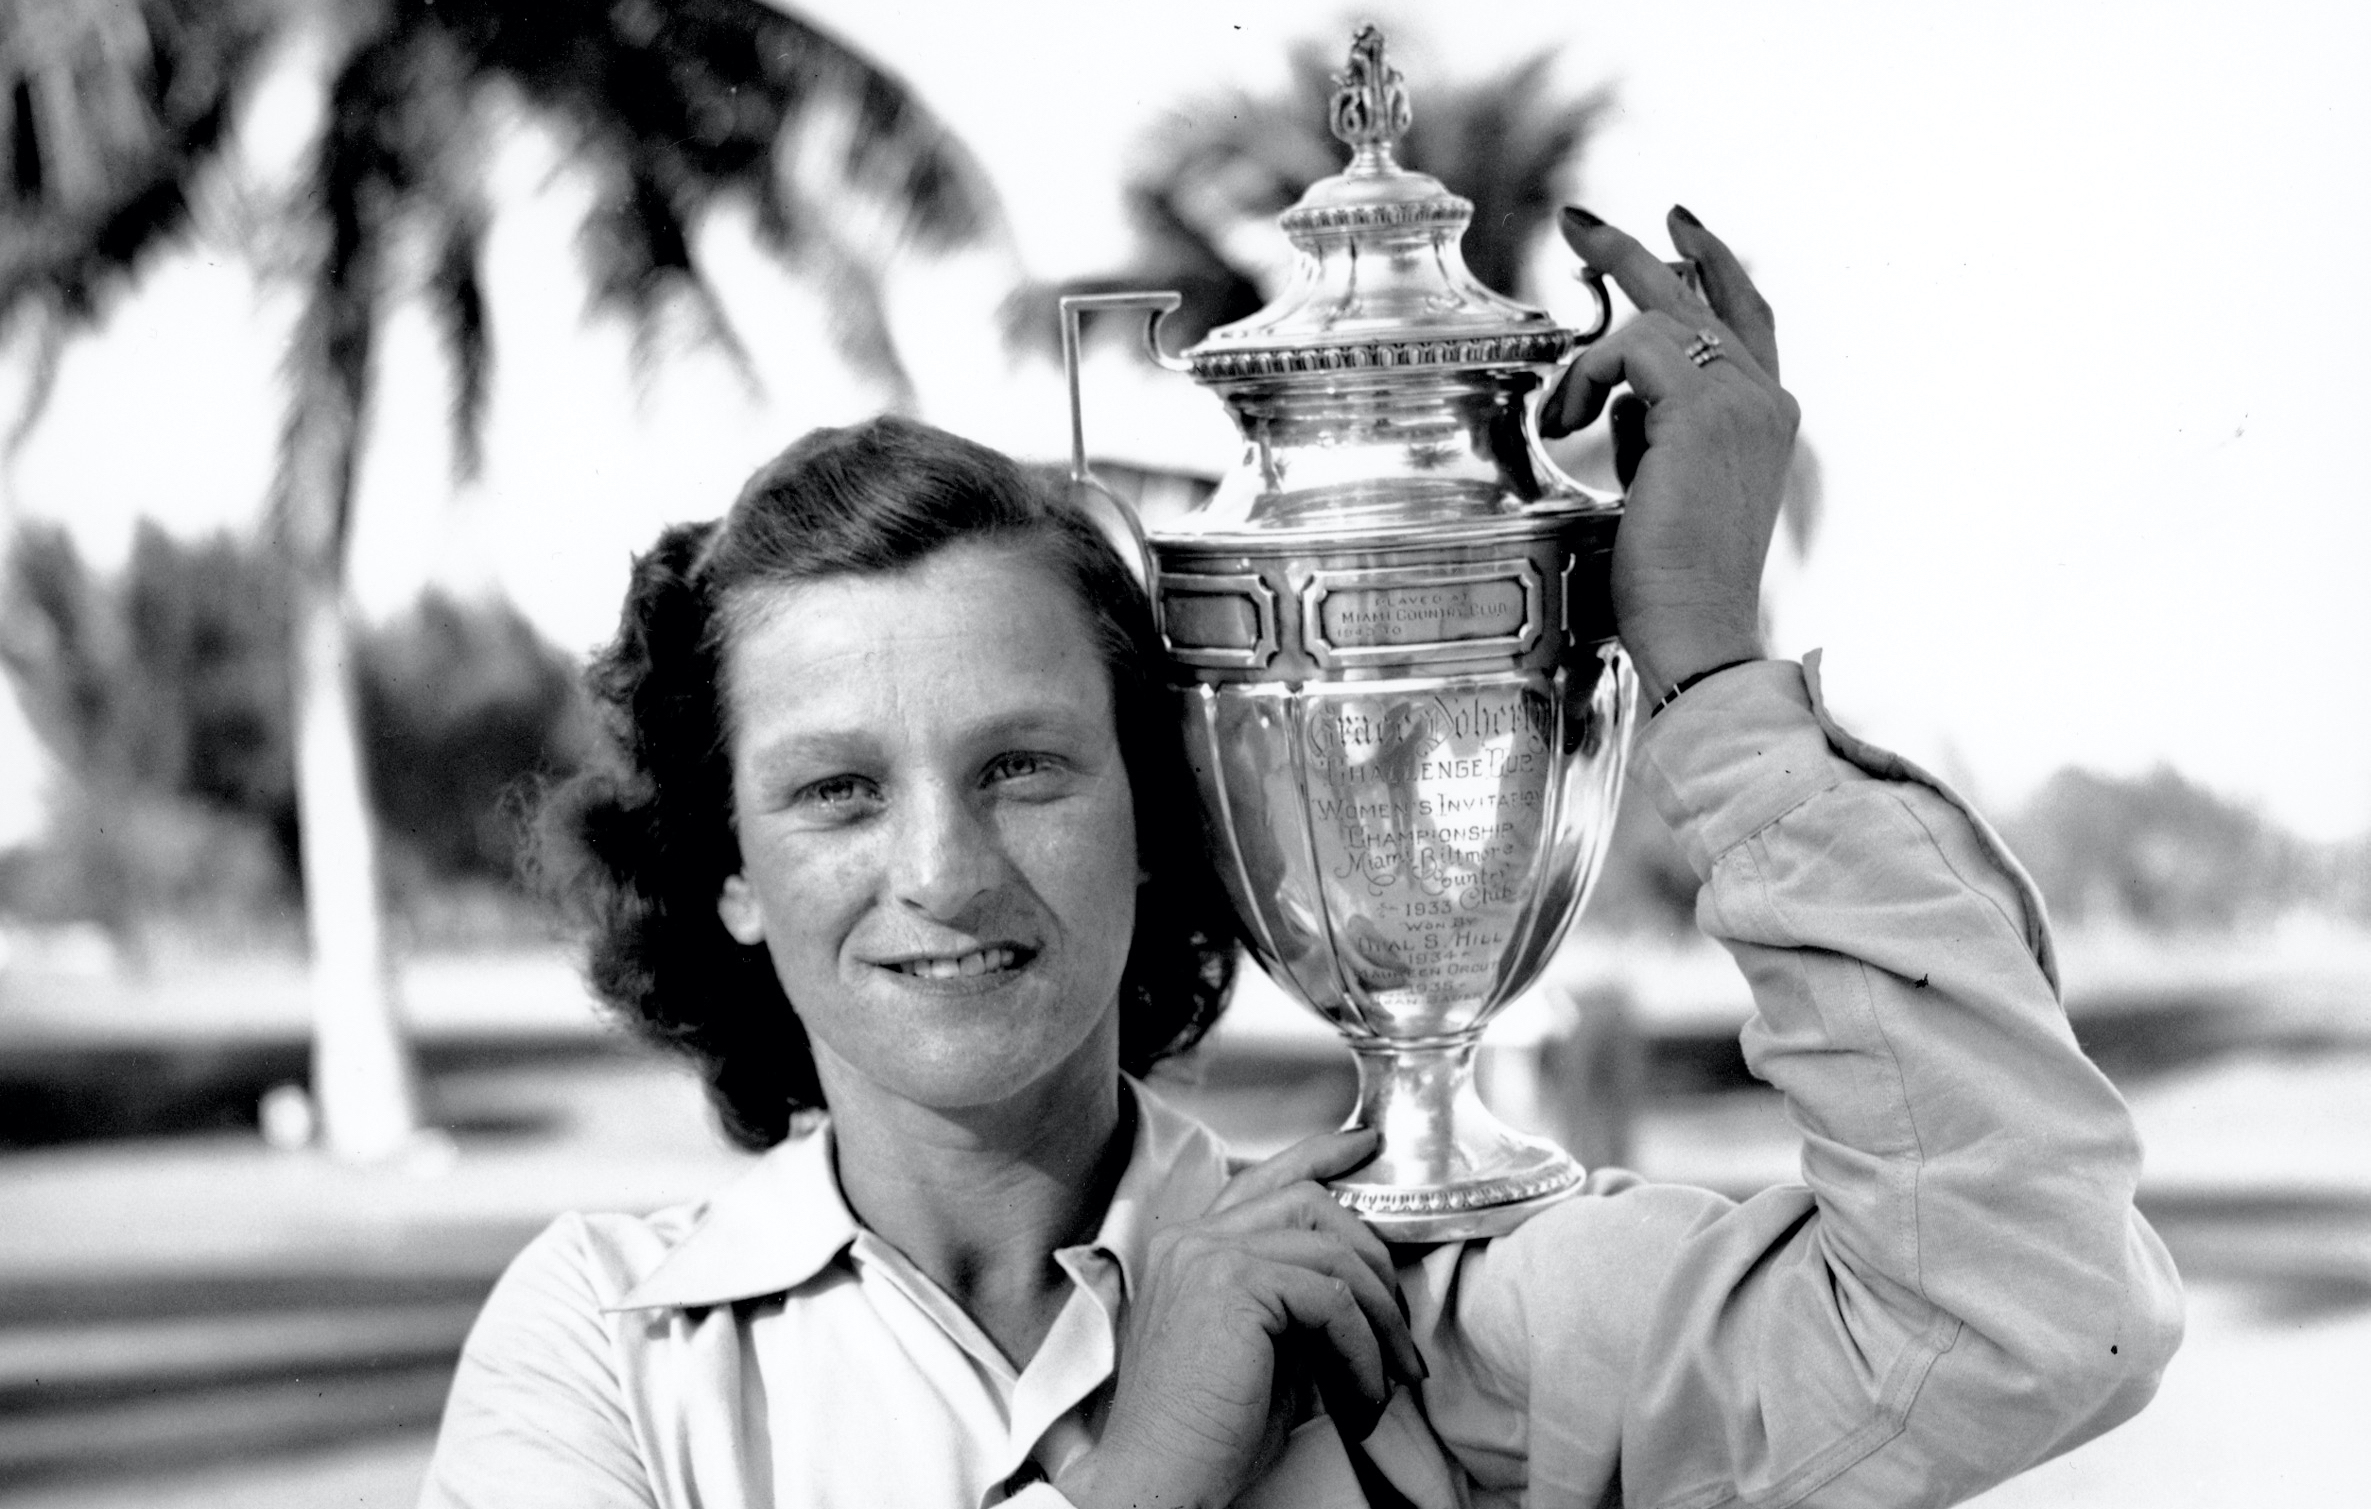 Babe Didrikson Zaharias poses with her trophy at the Miami Biltmore Country Club in Miami, Fl. on Feb. 1, 1947. Zaharias was presented the challenge cup for winning the Helen Lee Doherty Women's Invitational Championship golf tournament. (AP Photo)